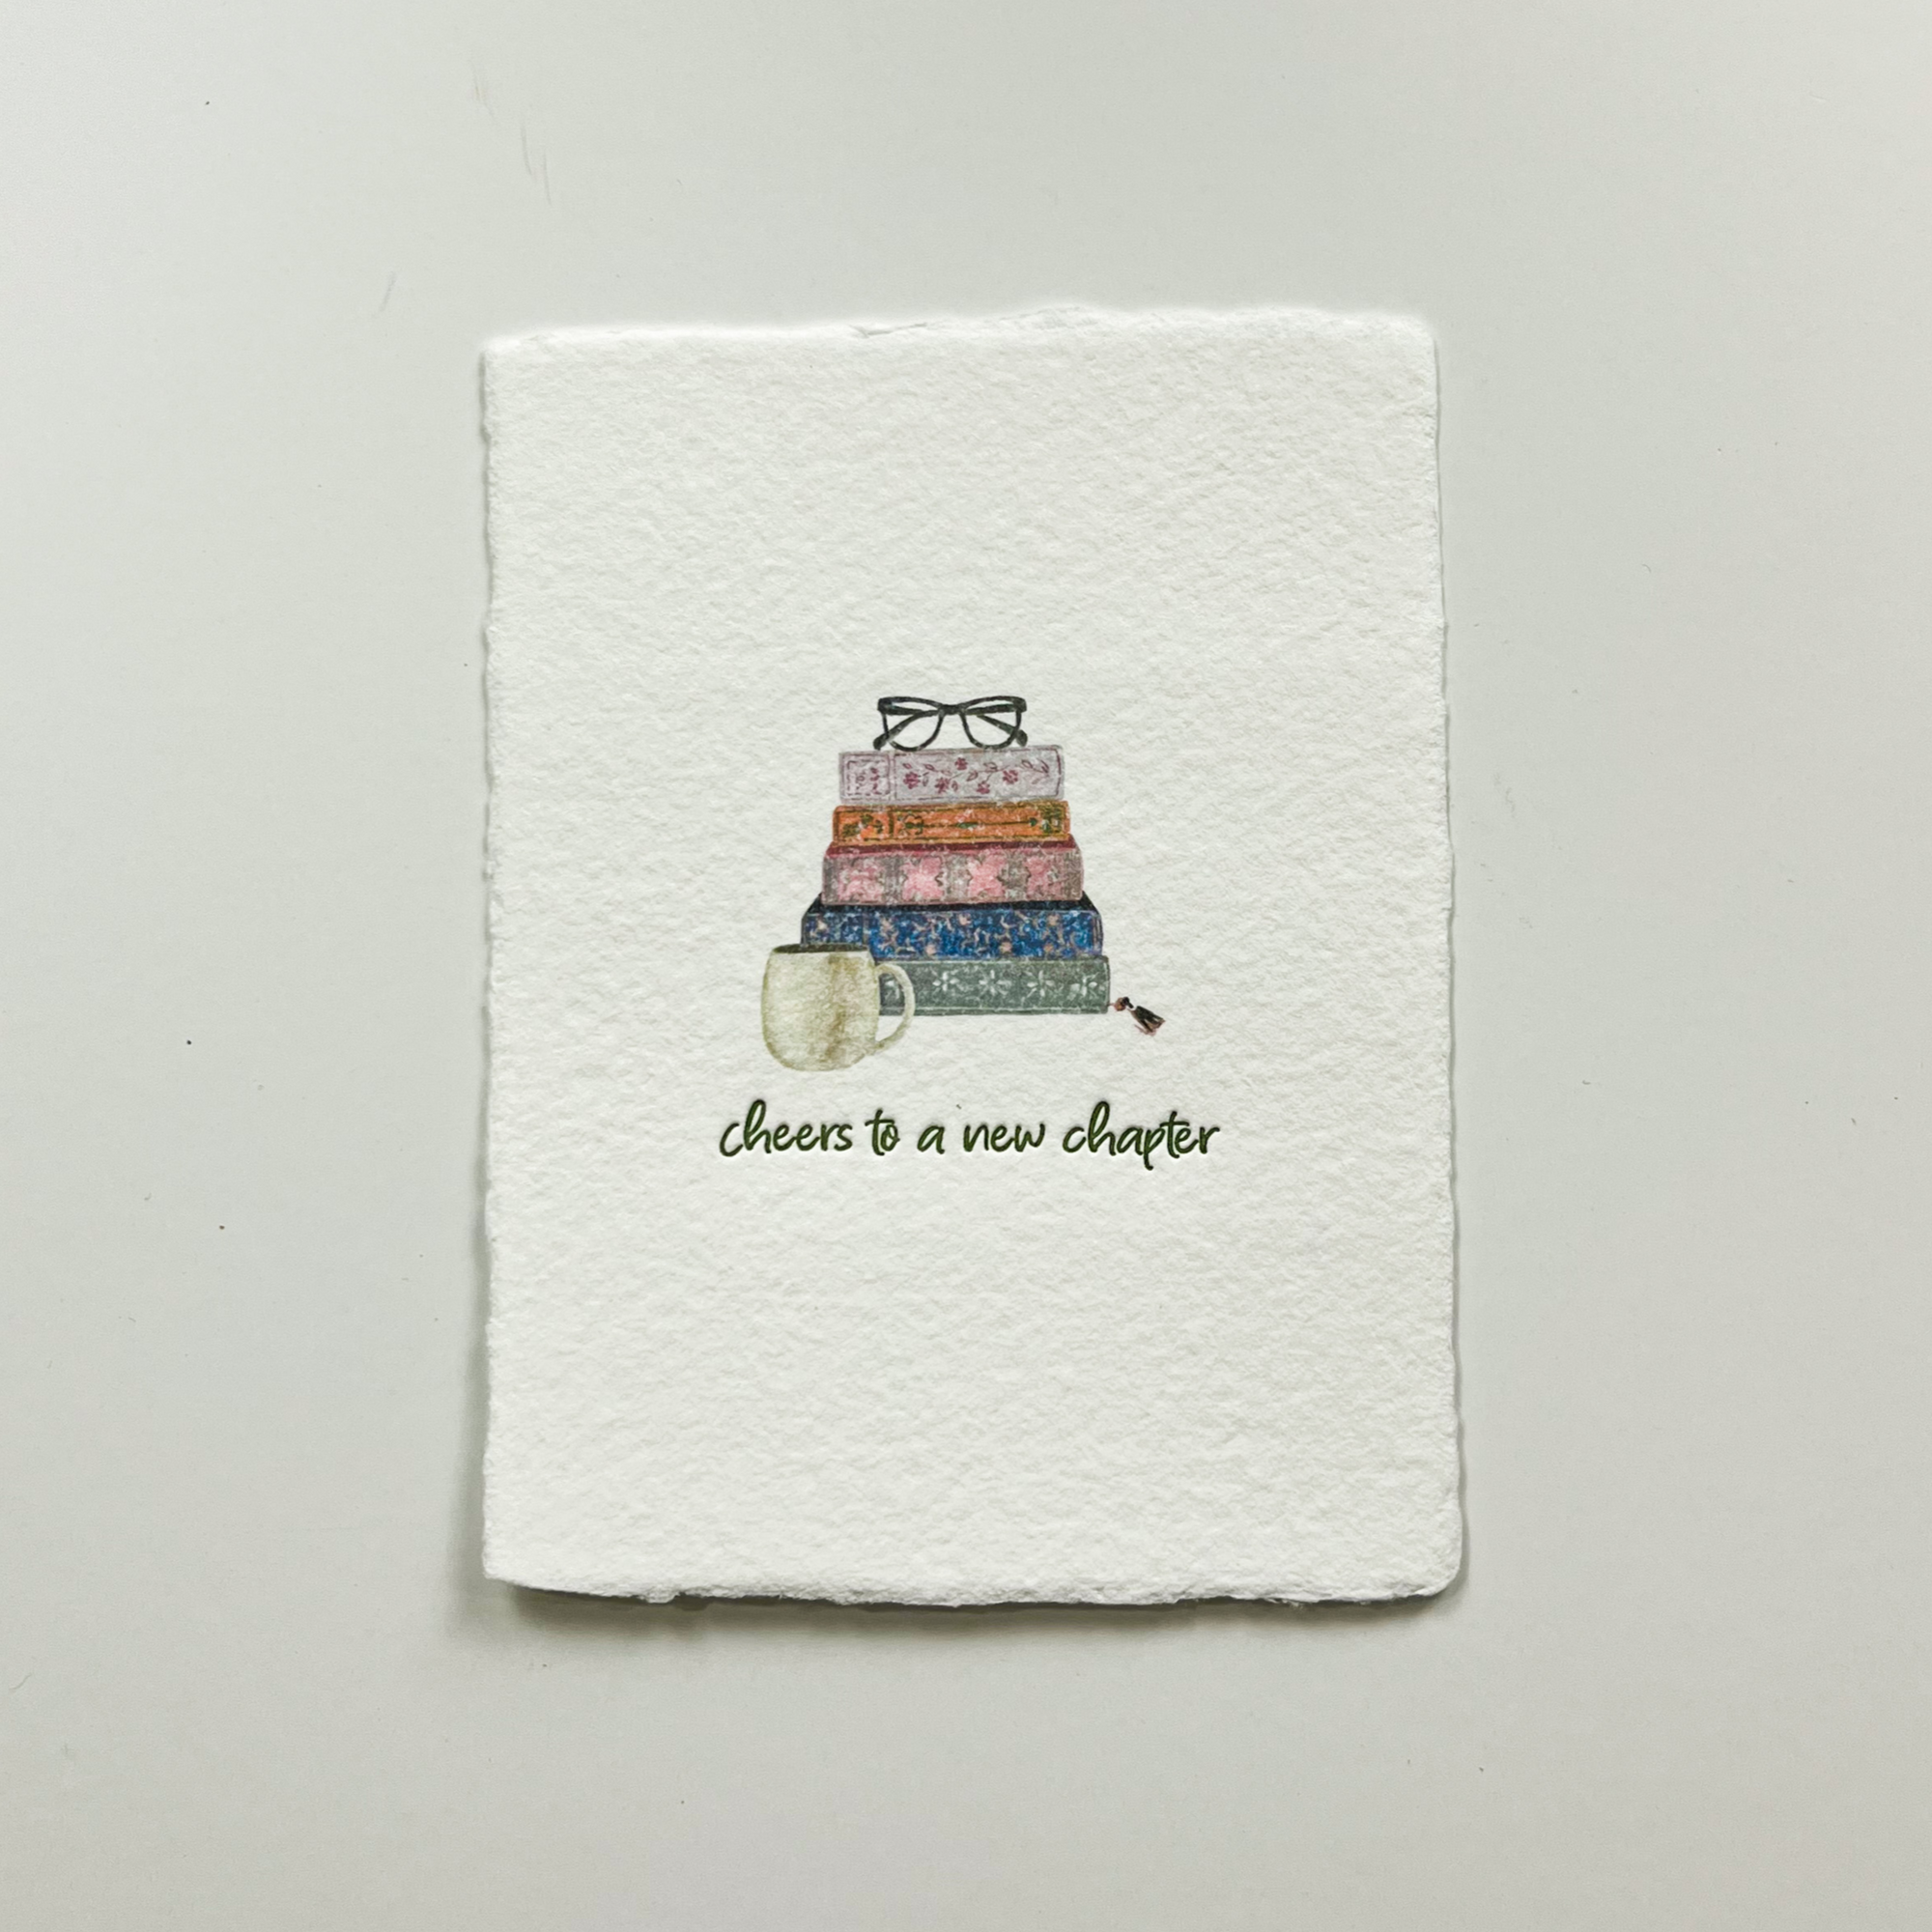 "Cheers to a new chapter" Greeting Card